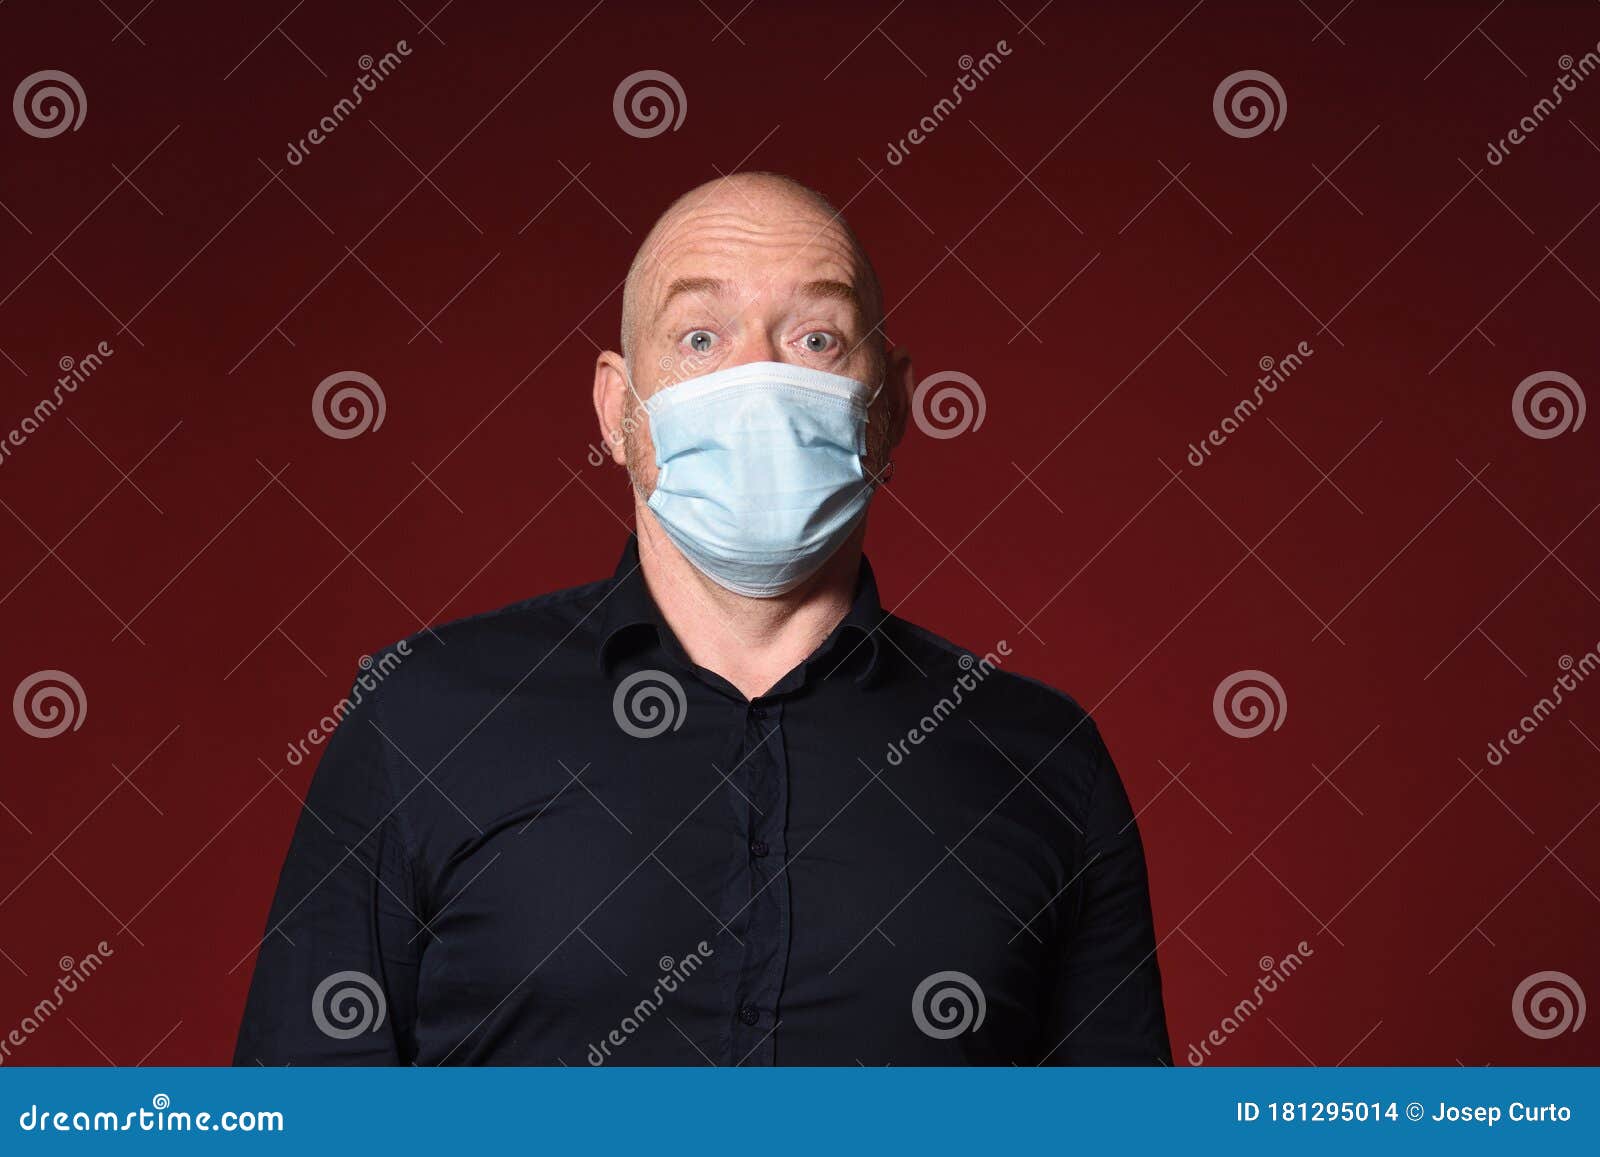 man with mask and gloves with face surprise expresion on red background